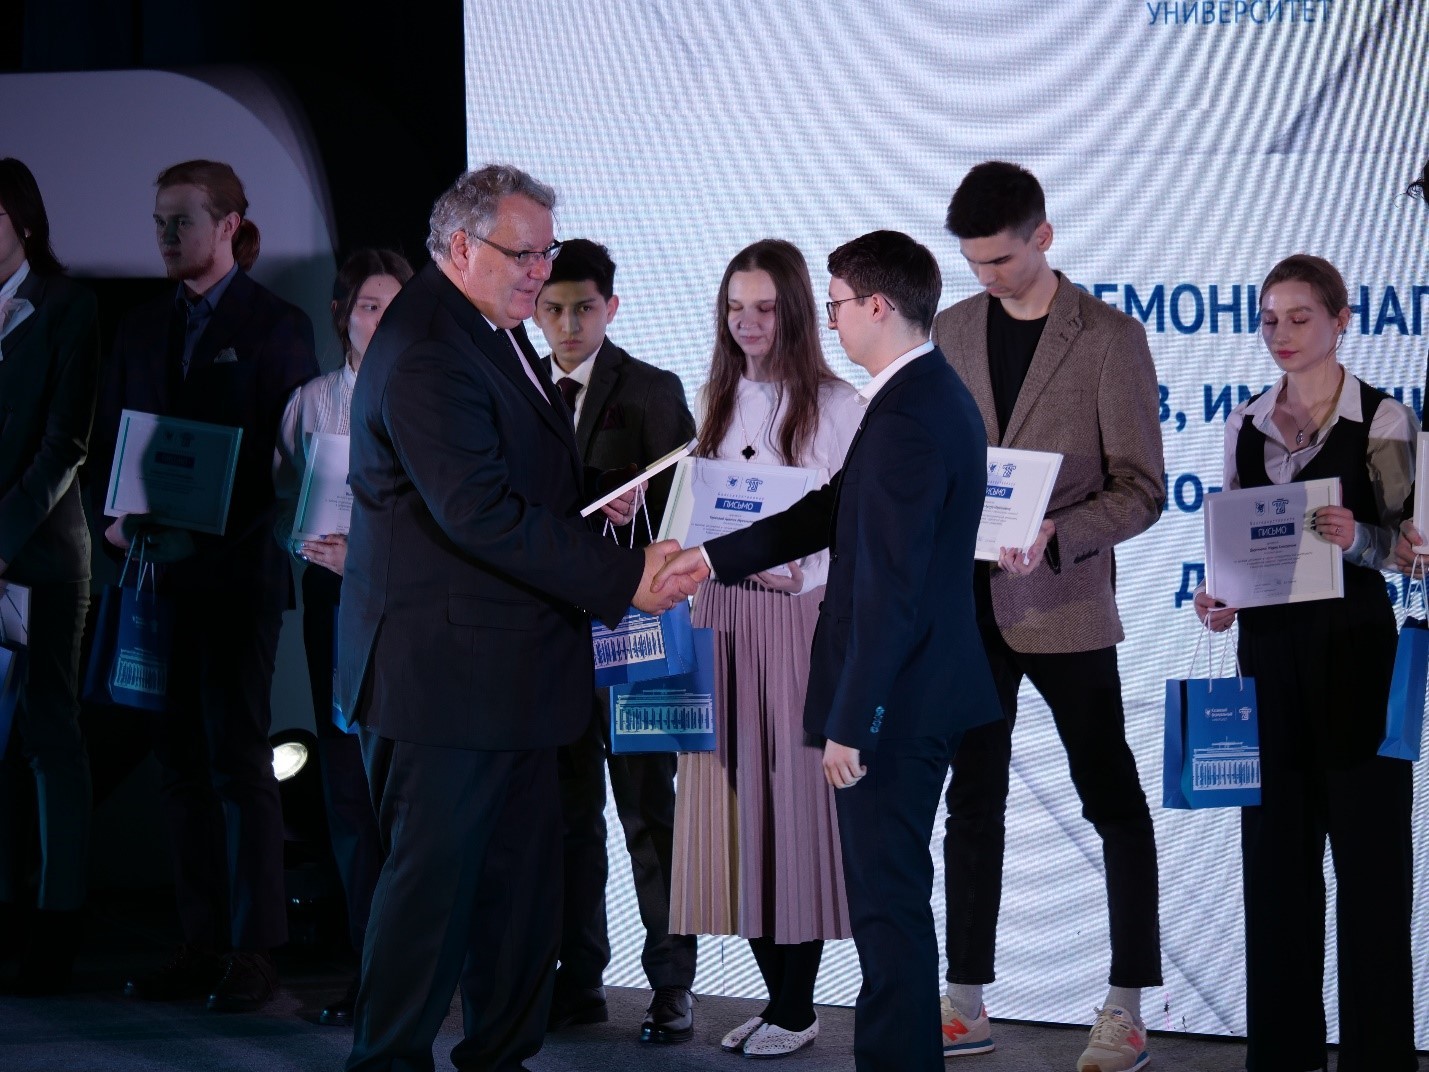 Laboratory of Intelligent Robotics Systems' members were awarded for their achievements in science